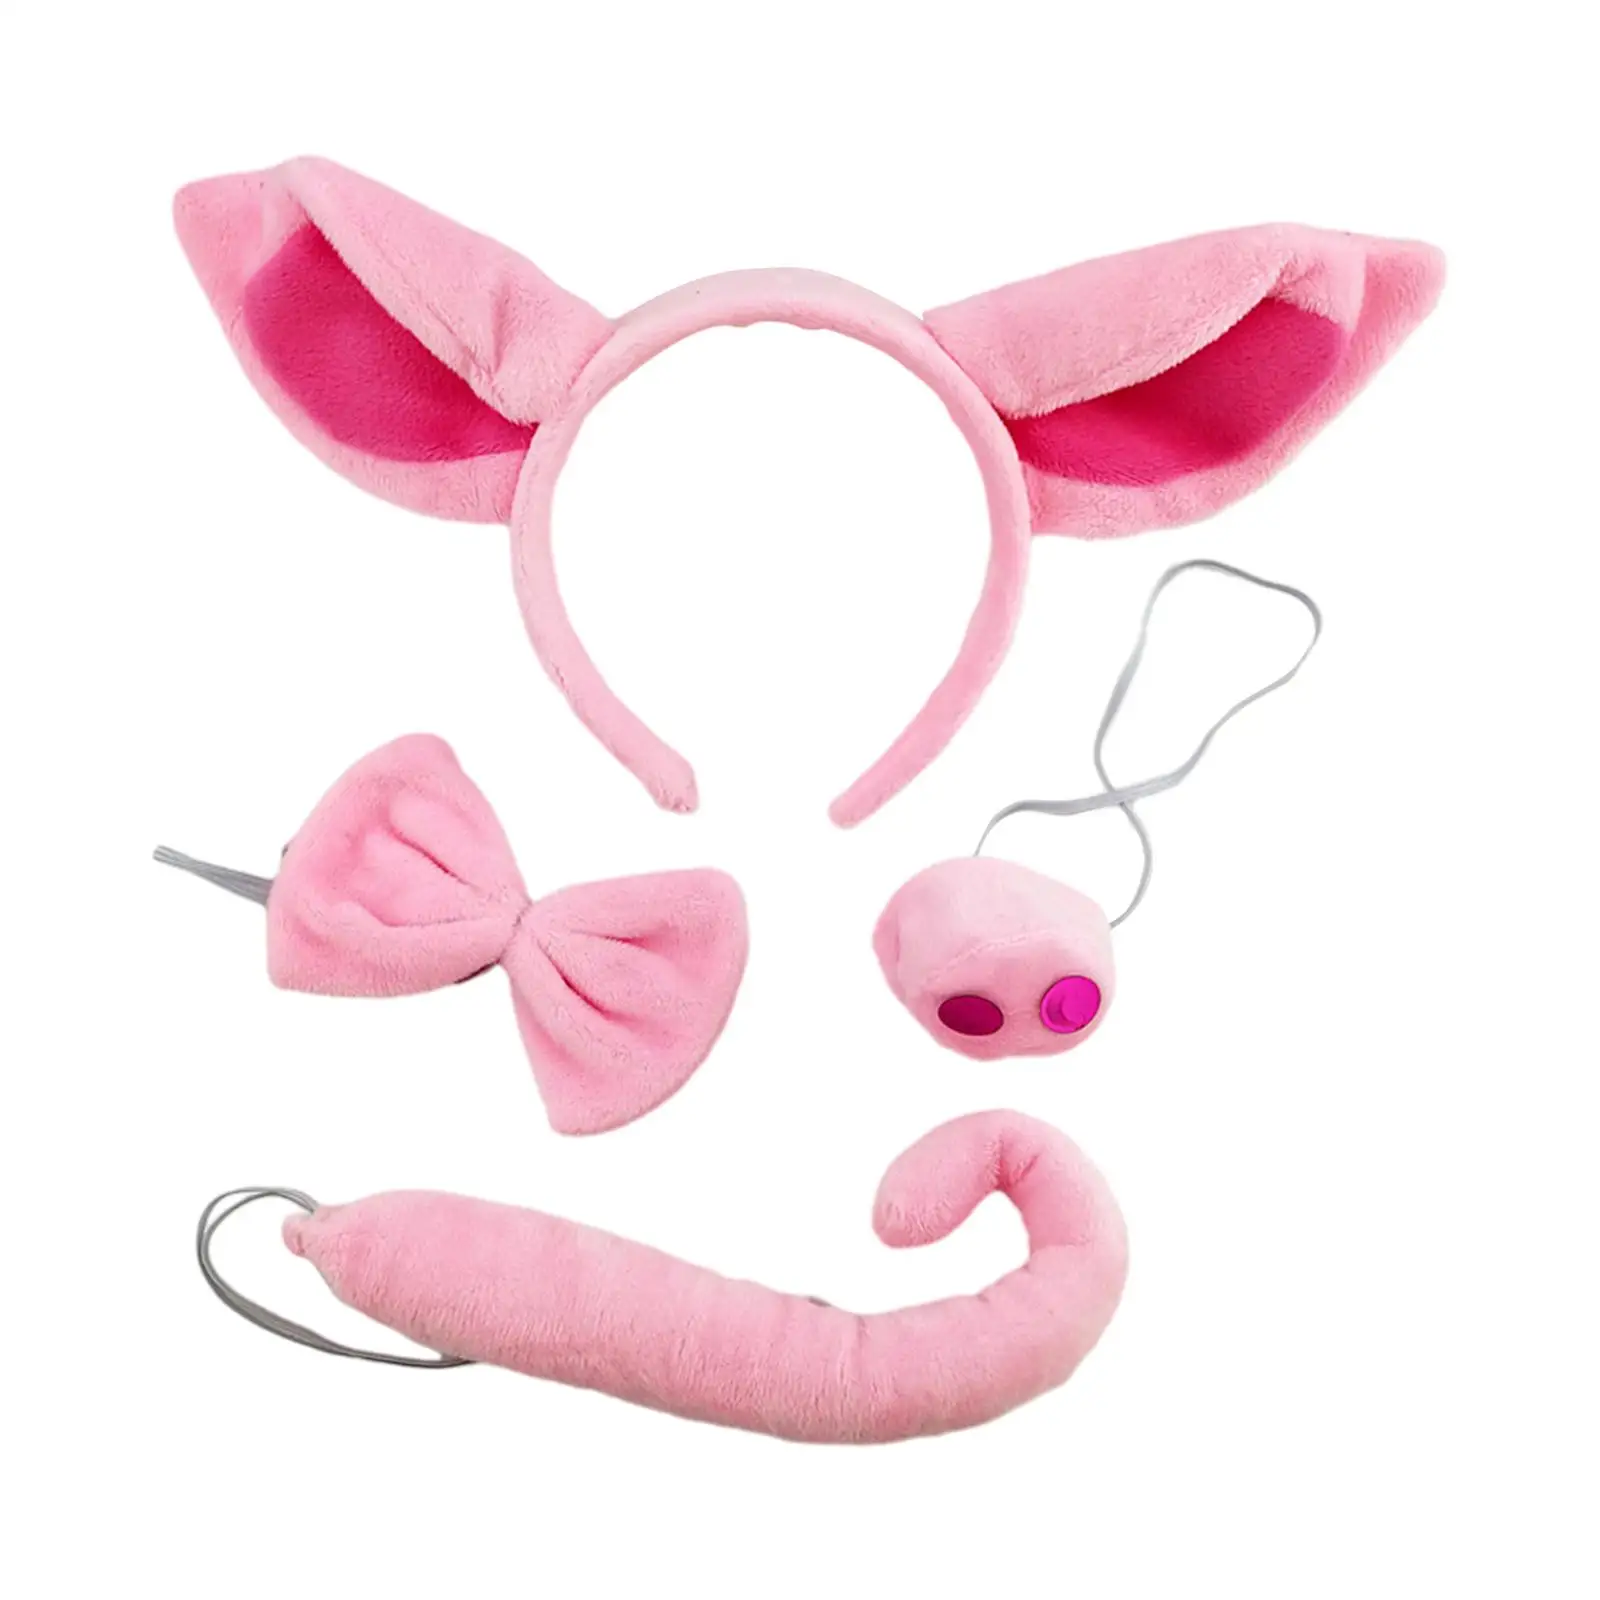 

4 Pieces Animal Pig Costume Hair Band Ears Headband Nose Bow Tie Tail for Family Party Photo Props Cosplay Masquerades Parties